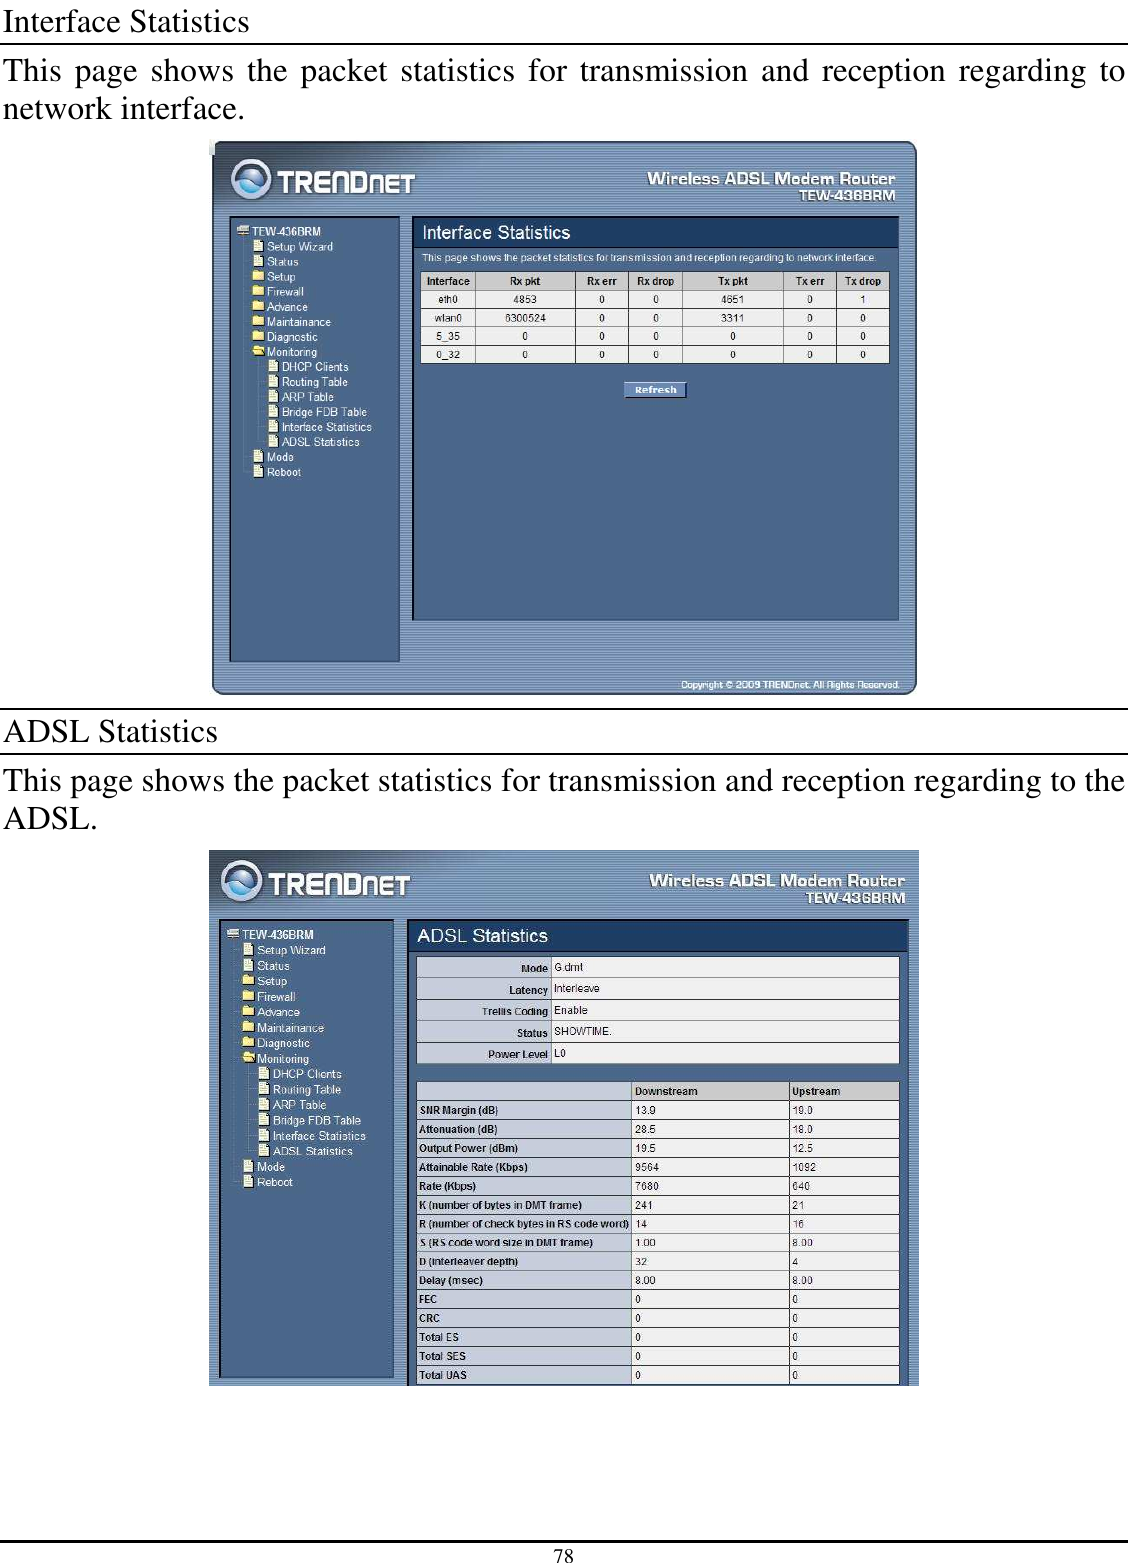 78 Interface Statistics This page shows the packet statistics for transmission and reception regarding to network interface.  ADSL Statistics This page shows the packet statistics for transmission and reception regarding to the ADSL.  